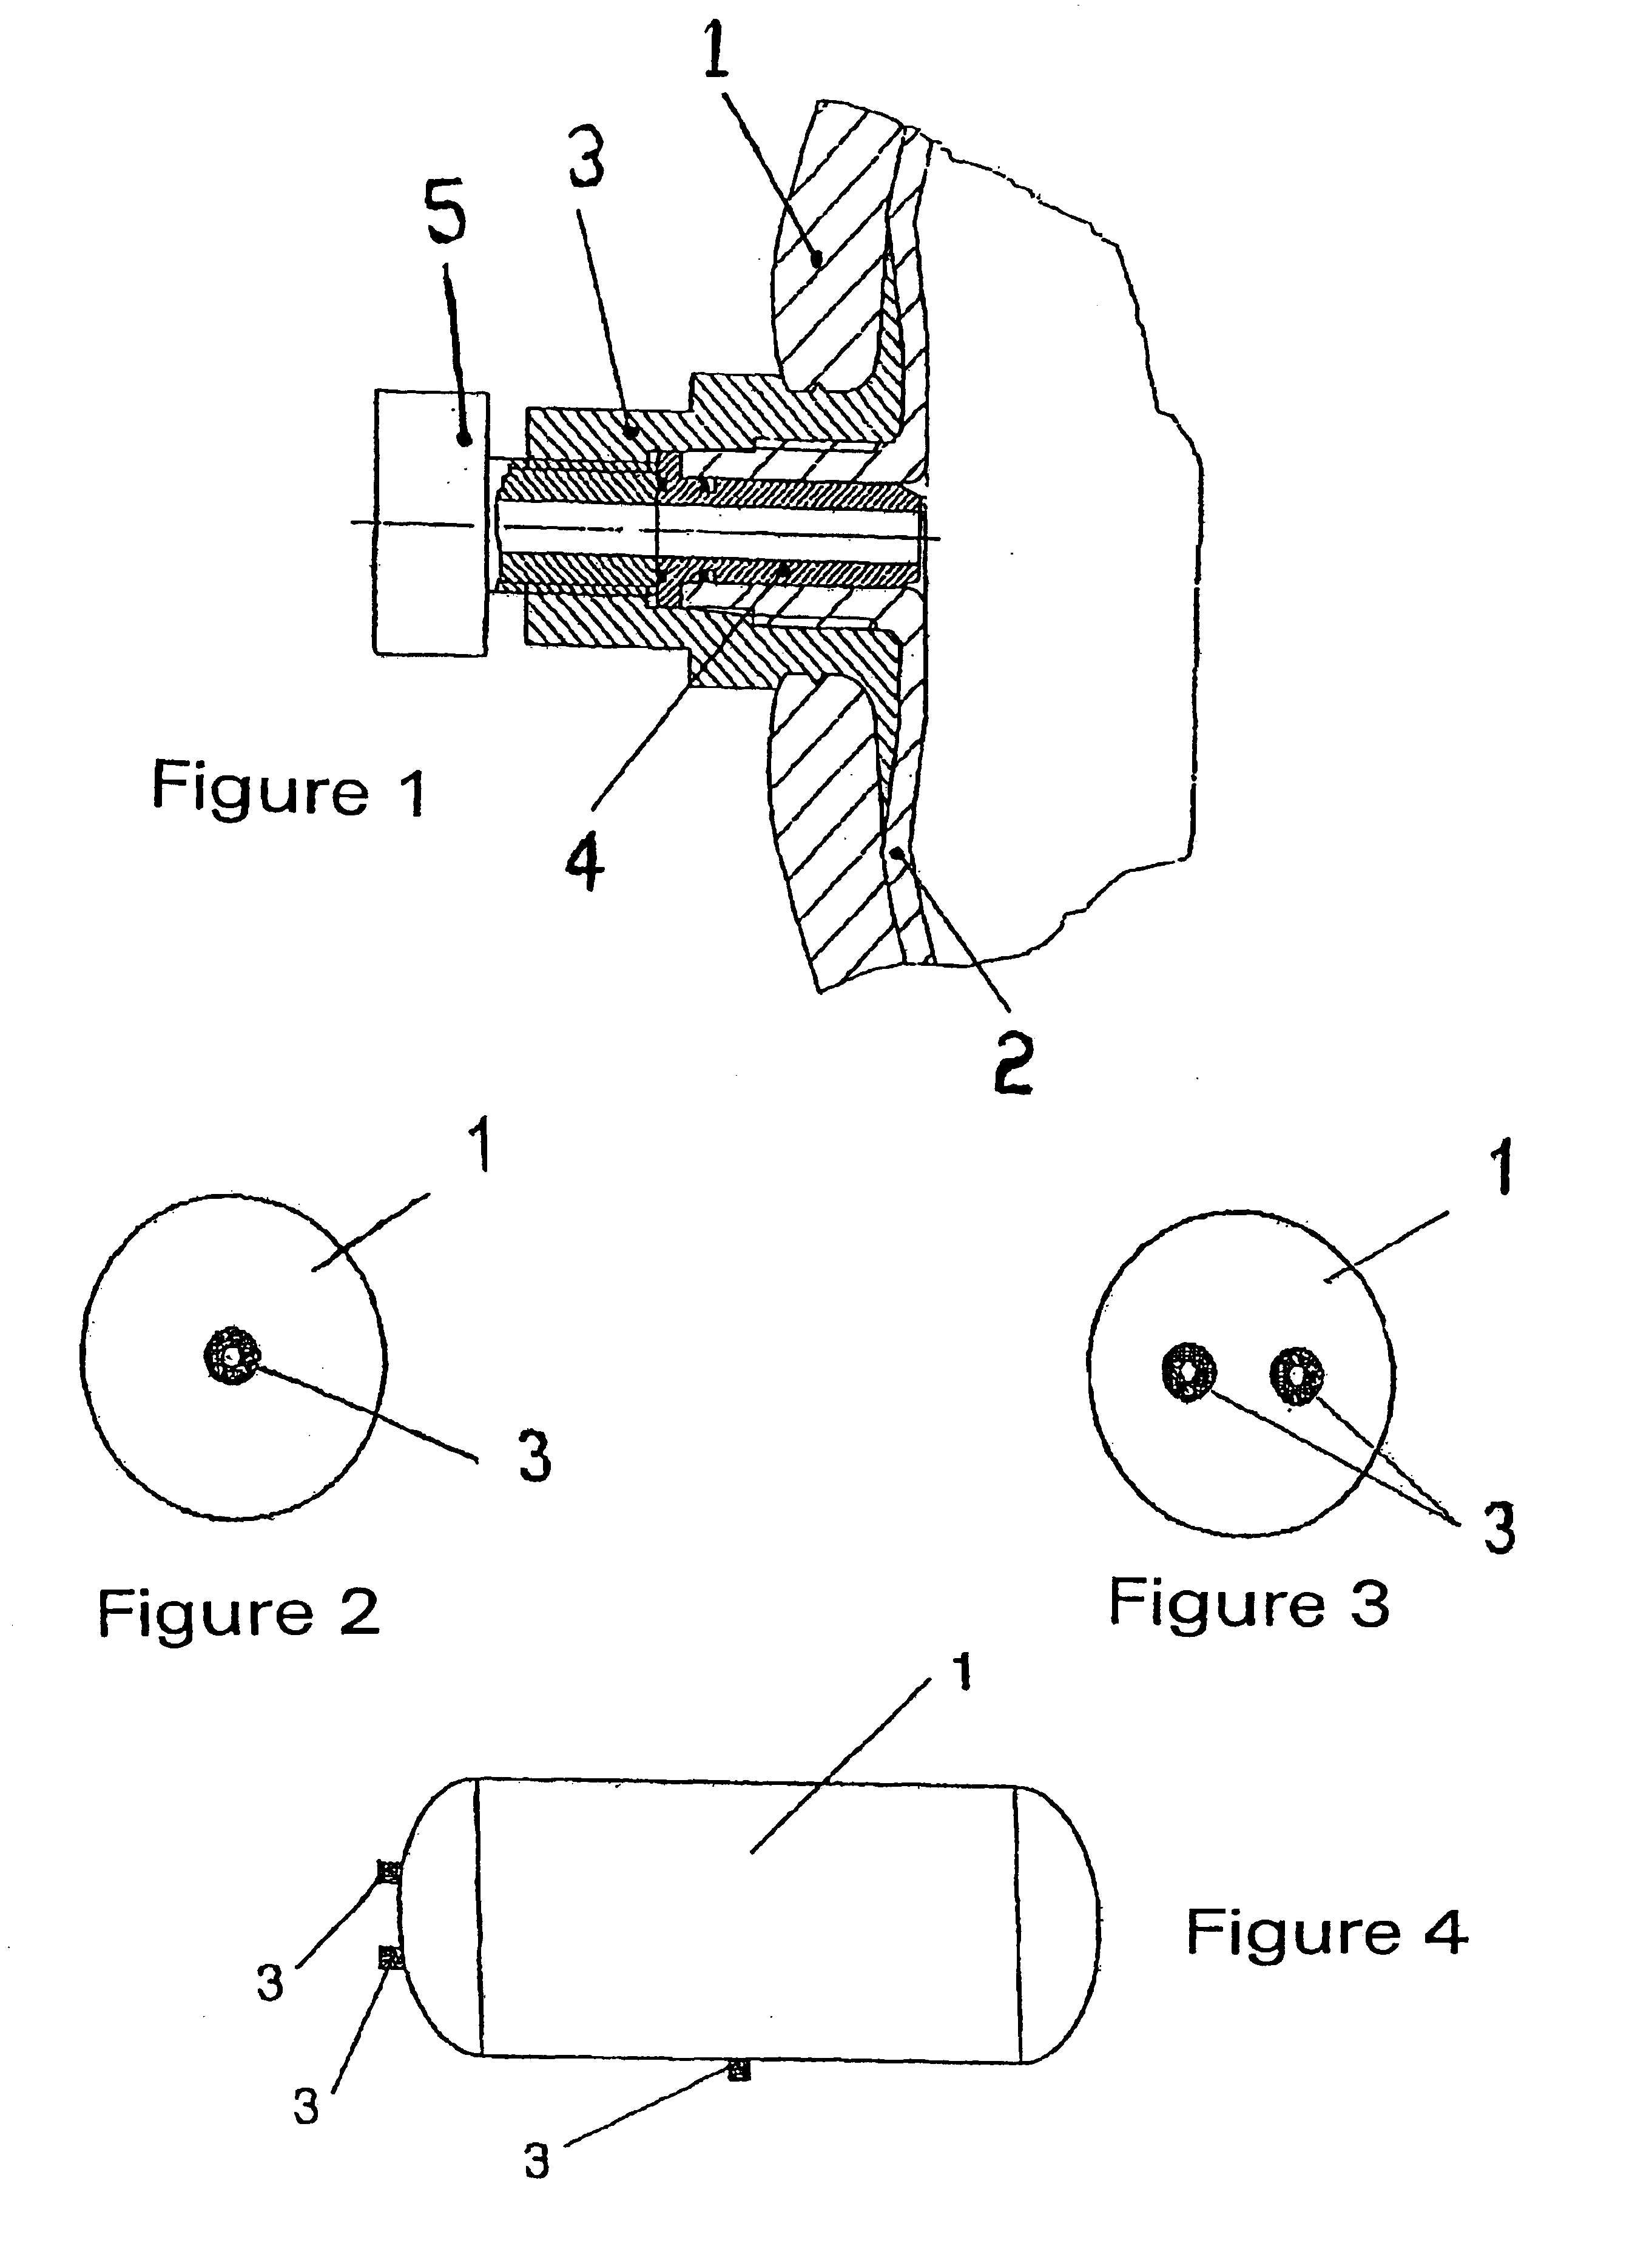 Pressurized container for storing pressurized liquid and/or gaseous media, consisting of a plastic core container which is reinforced with fibre-reinforced plastics and a method for producing the same